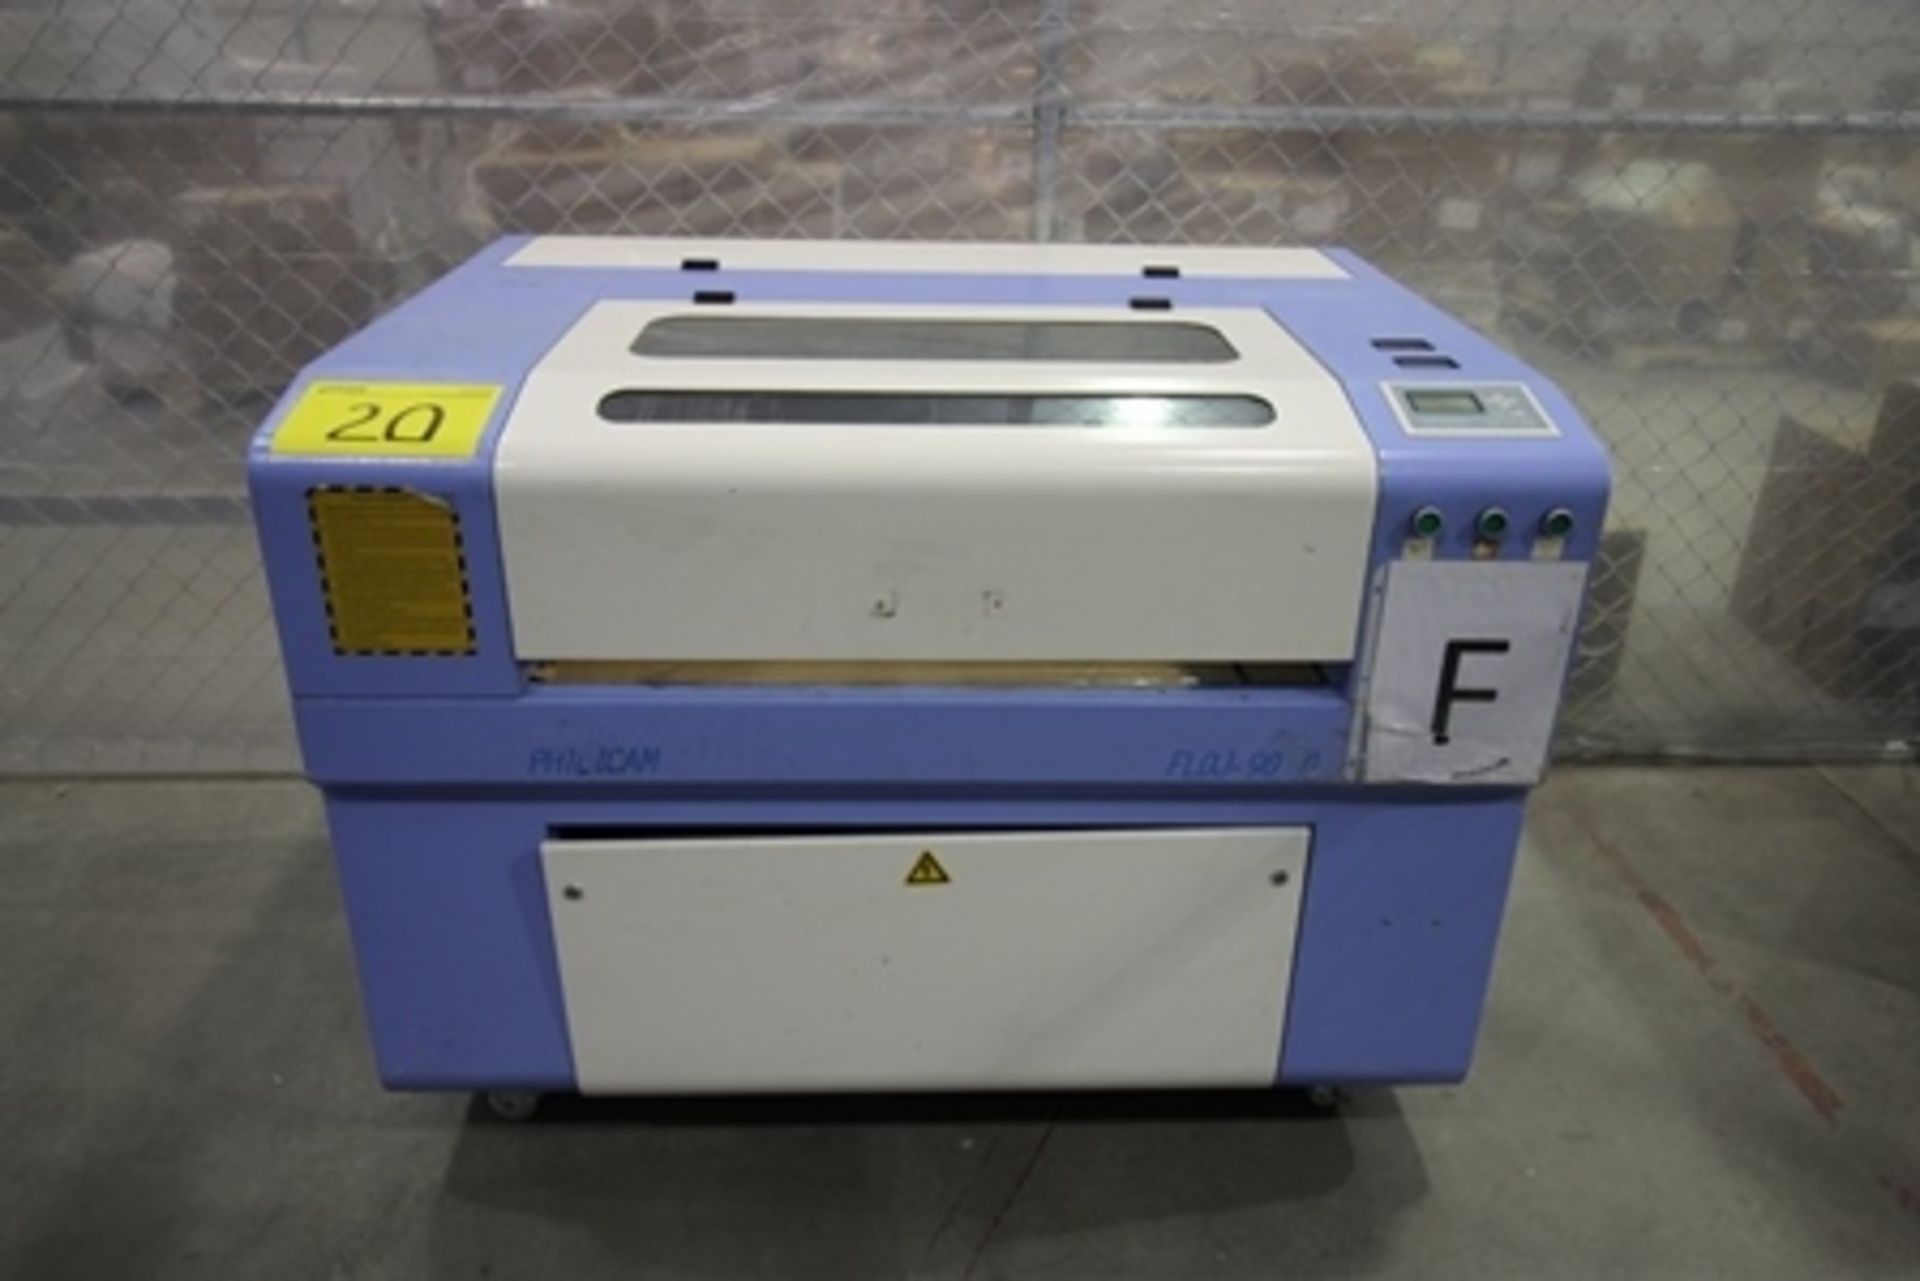 Phillican CO2 laser engraver and cutting machine, model 6090.